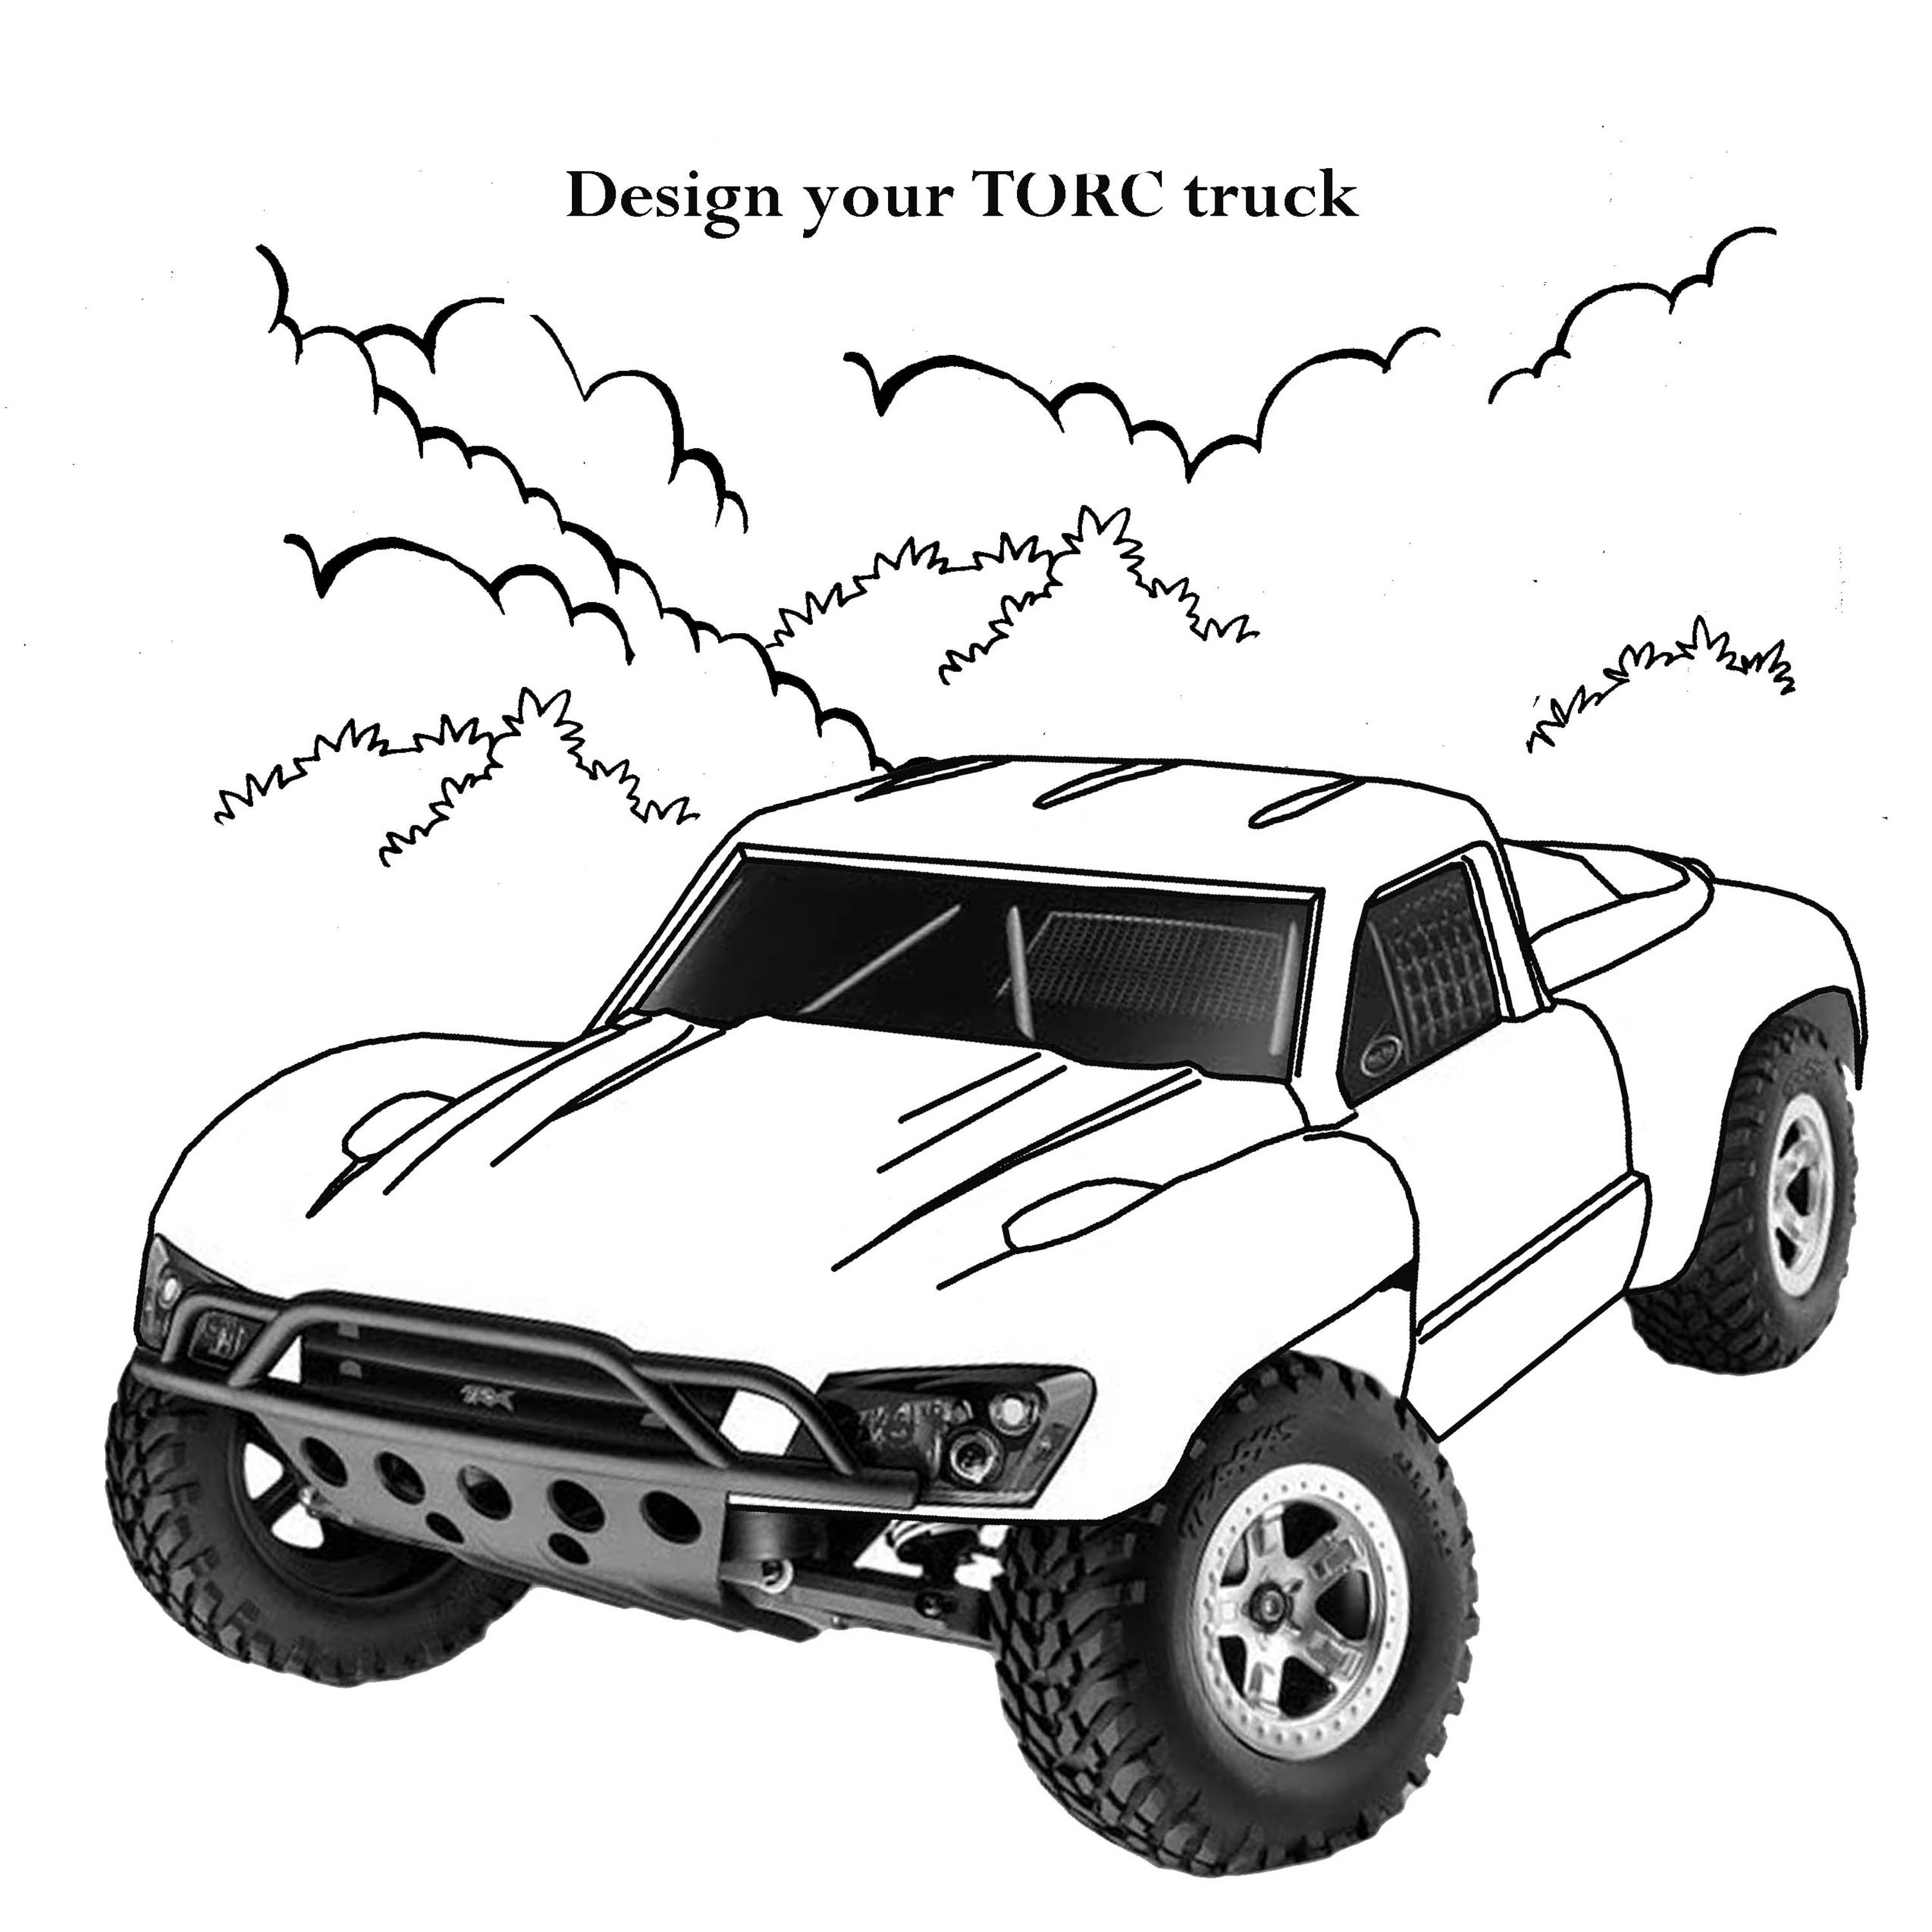 Coloring Pages Of Cars And Trucks - Coloring